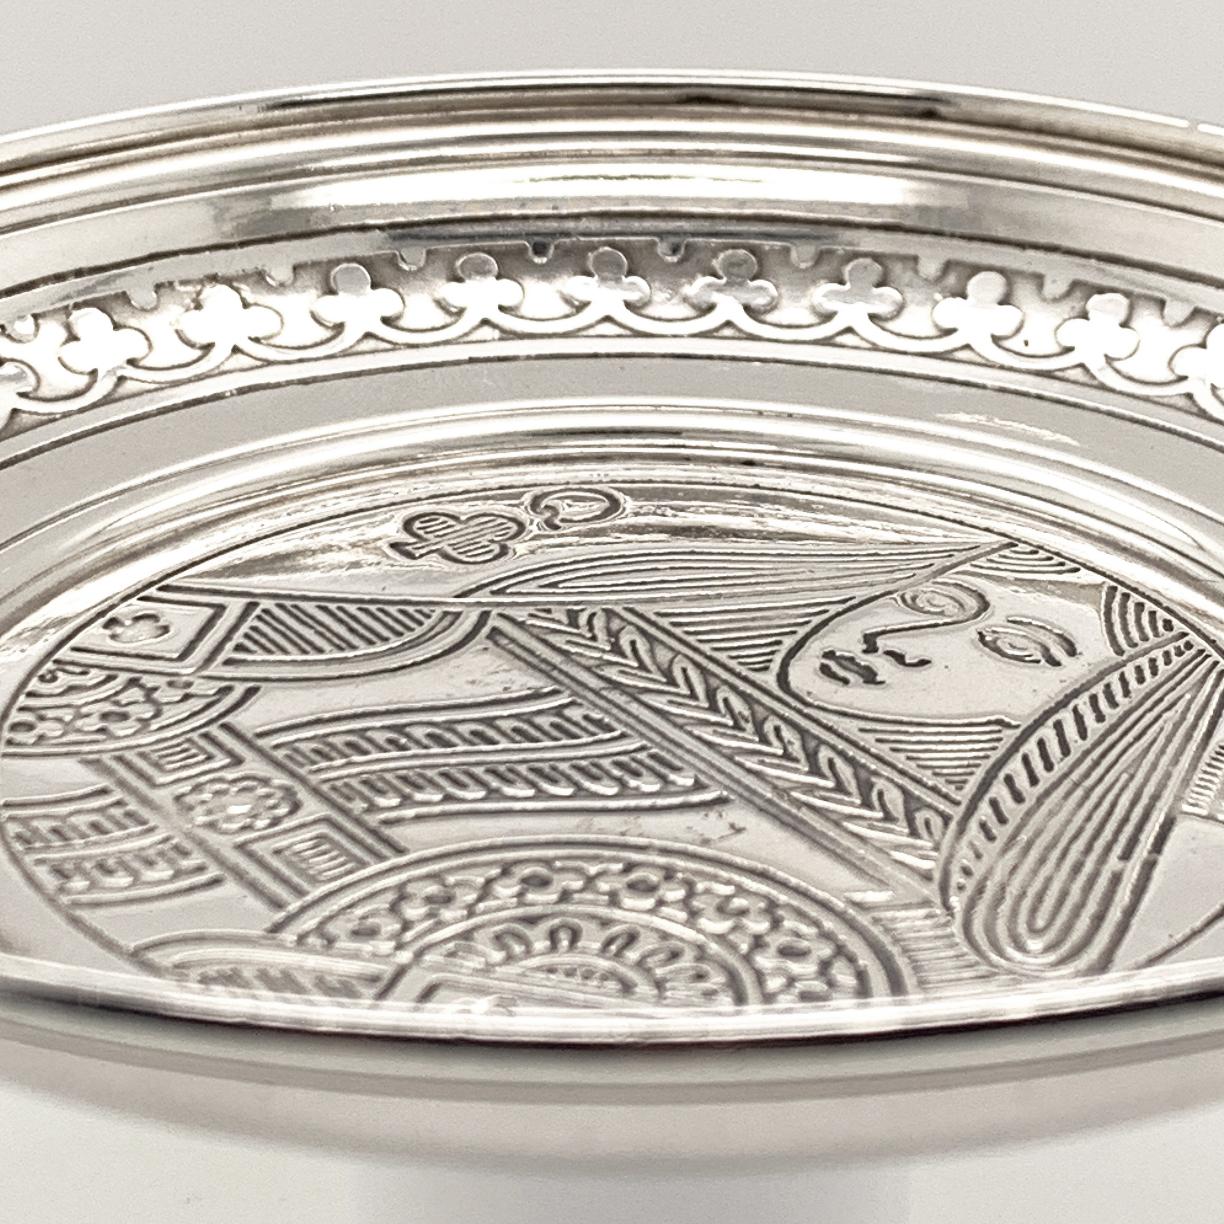 Women's or Men's Tiffany & Co. Queen of Clubs Sterling Dish